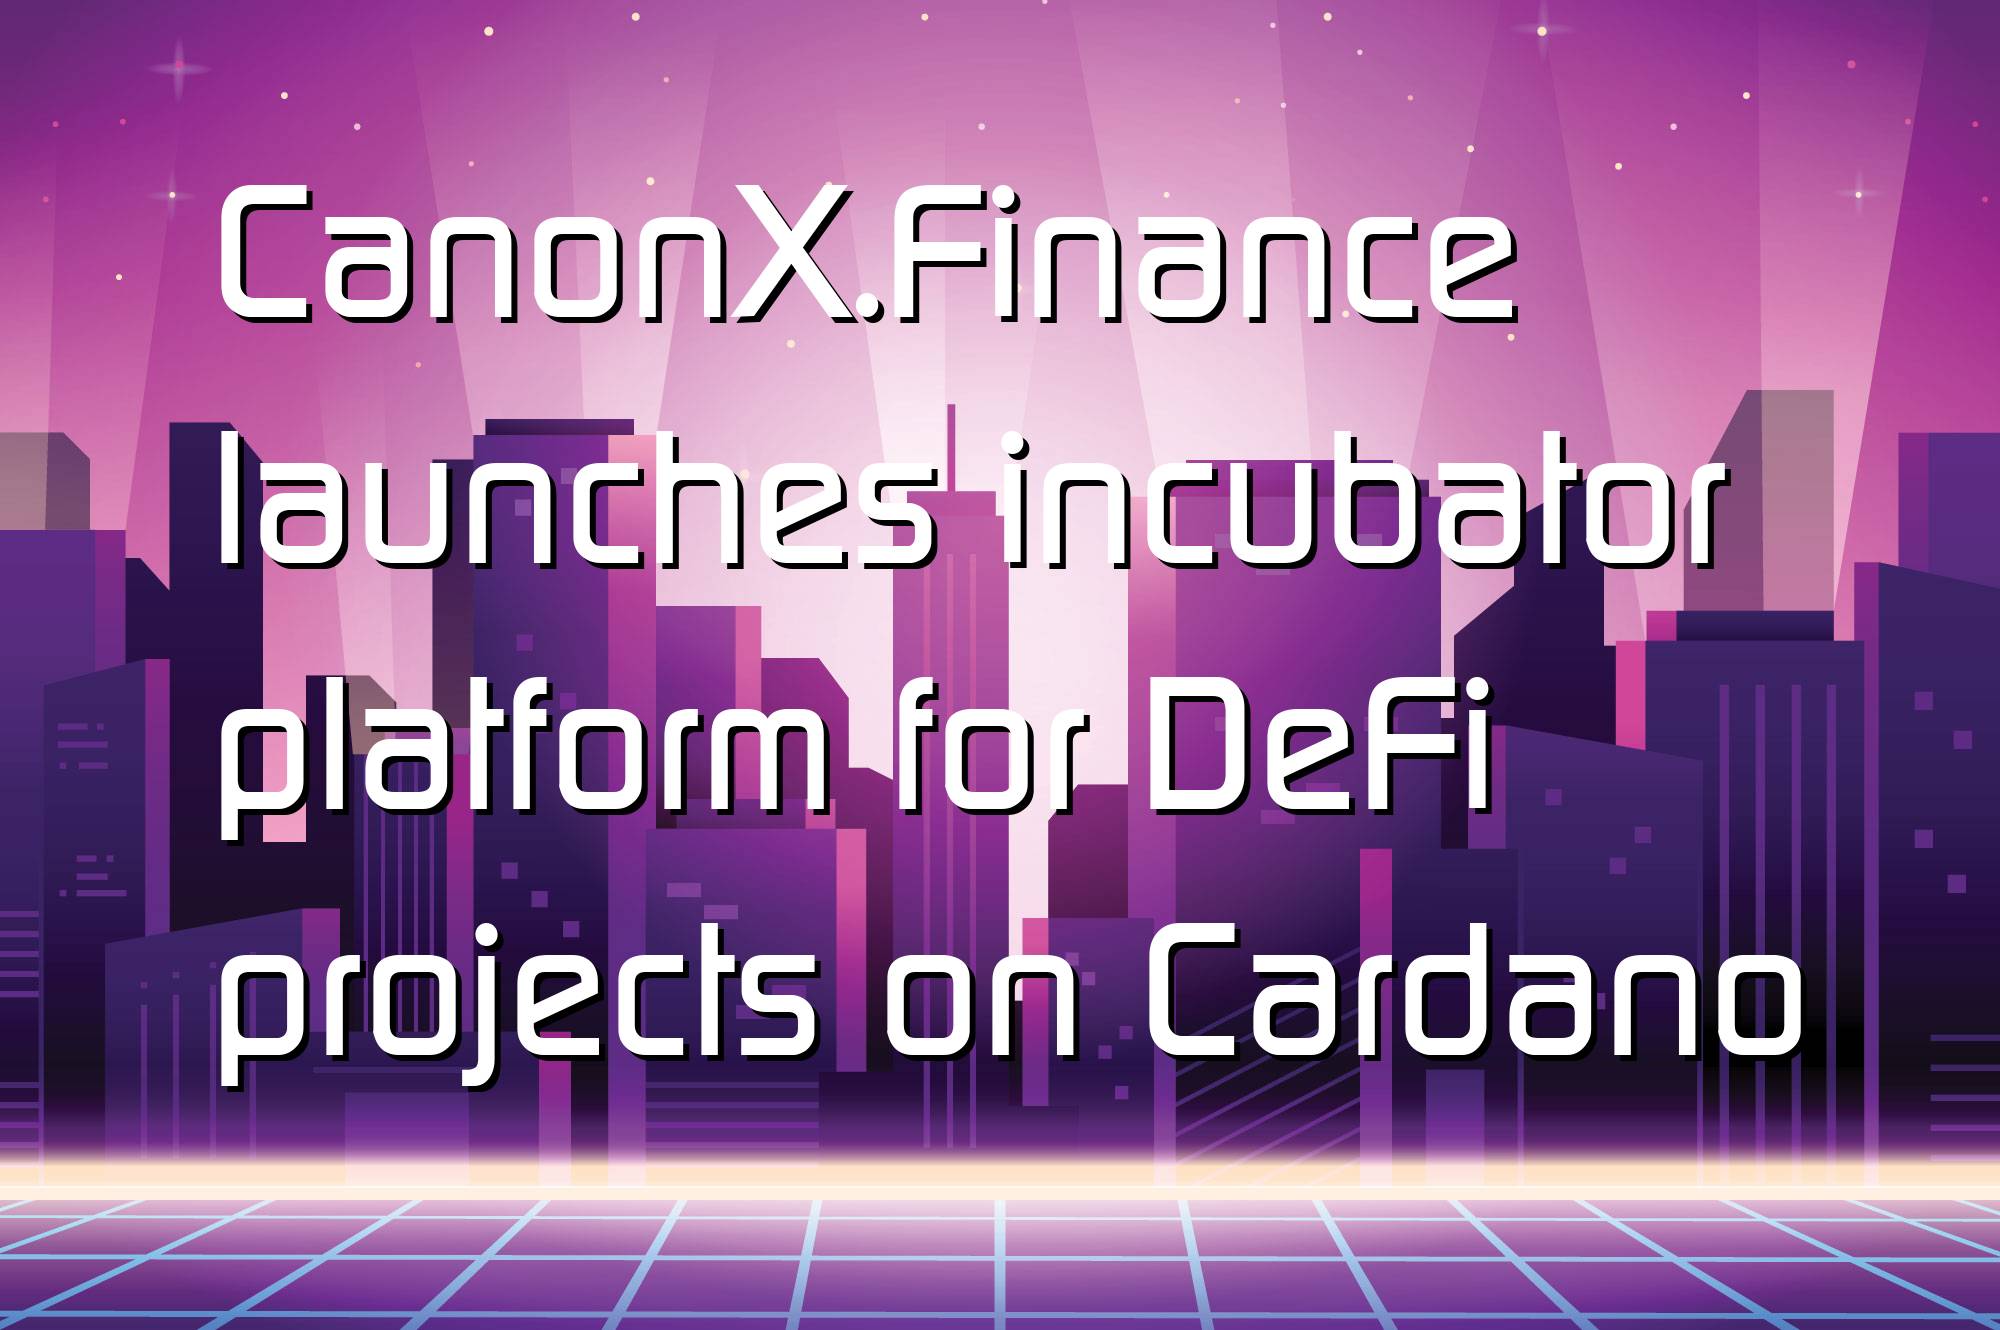 @$65192: CanonX.Finance launches incubator platform for DeFi projects on Cardano